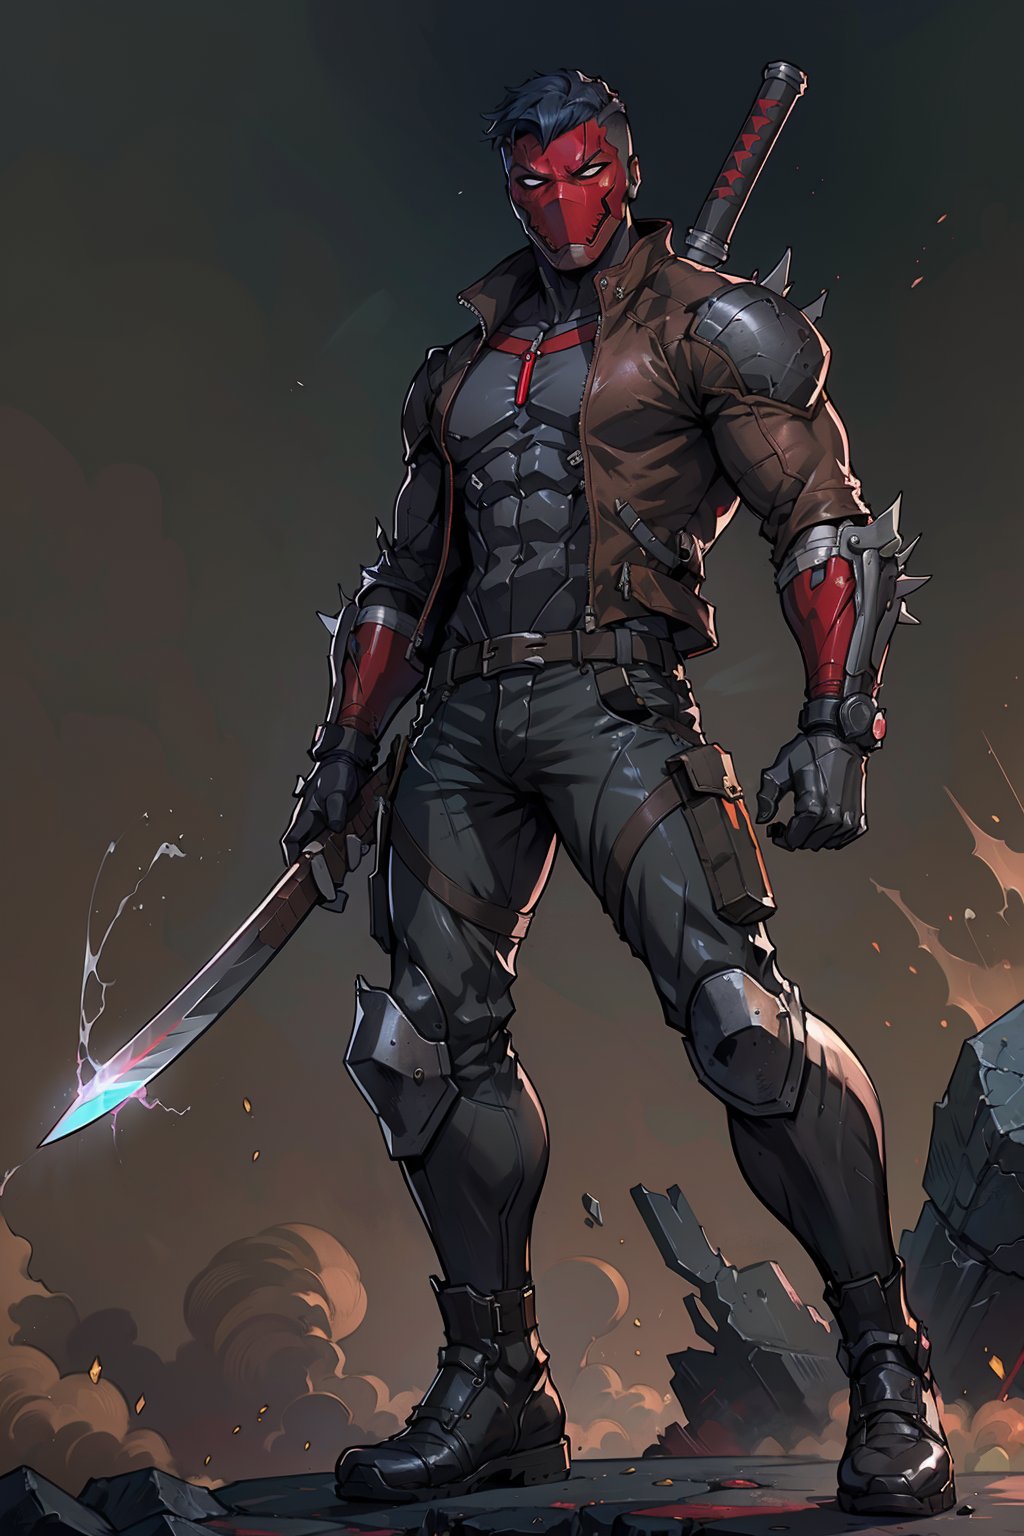 an accurate and detailed full-body shot of a male superhero character named Wraith, tall and lean bulid, (Crimson half-mask:1.3), exposed cybernetic red eye, grafted cybernetic jawline, (Spiky white fringe hair:1.2), (choppy black undercut hairstyle:1.2), (Skintight black ninja-tech suit with crimson energized circuitry:1.1), (electric blue biker jacket:1.1), asymmetric collar, rolled sleeves, Gunmetal armor plates on shoulders, chest emblem, (Fitted burgundy leather moto-pants), (blue-gray armorized cargo panels), Knee guards, armored greaves, black combat boots, cyberized gunmetal strike gauntlet, Holsters, sheaths, tech-utility pouches, (holding an obsidian high-frequency katana), masterpiece, high quality, 4K, raidenmgr, nero, rhdc, a man, red helment, brown leather jacket, gray skintight suit, gloves, belt, boots, absurdres<lora:EMS-75483-EMS:0.400000>, <lora:EMS-14003-EMS:0.500000>, <lora:EMS-311133-EMS:0.500000>